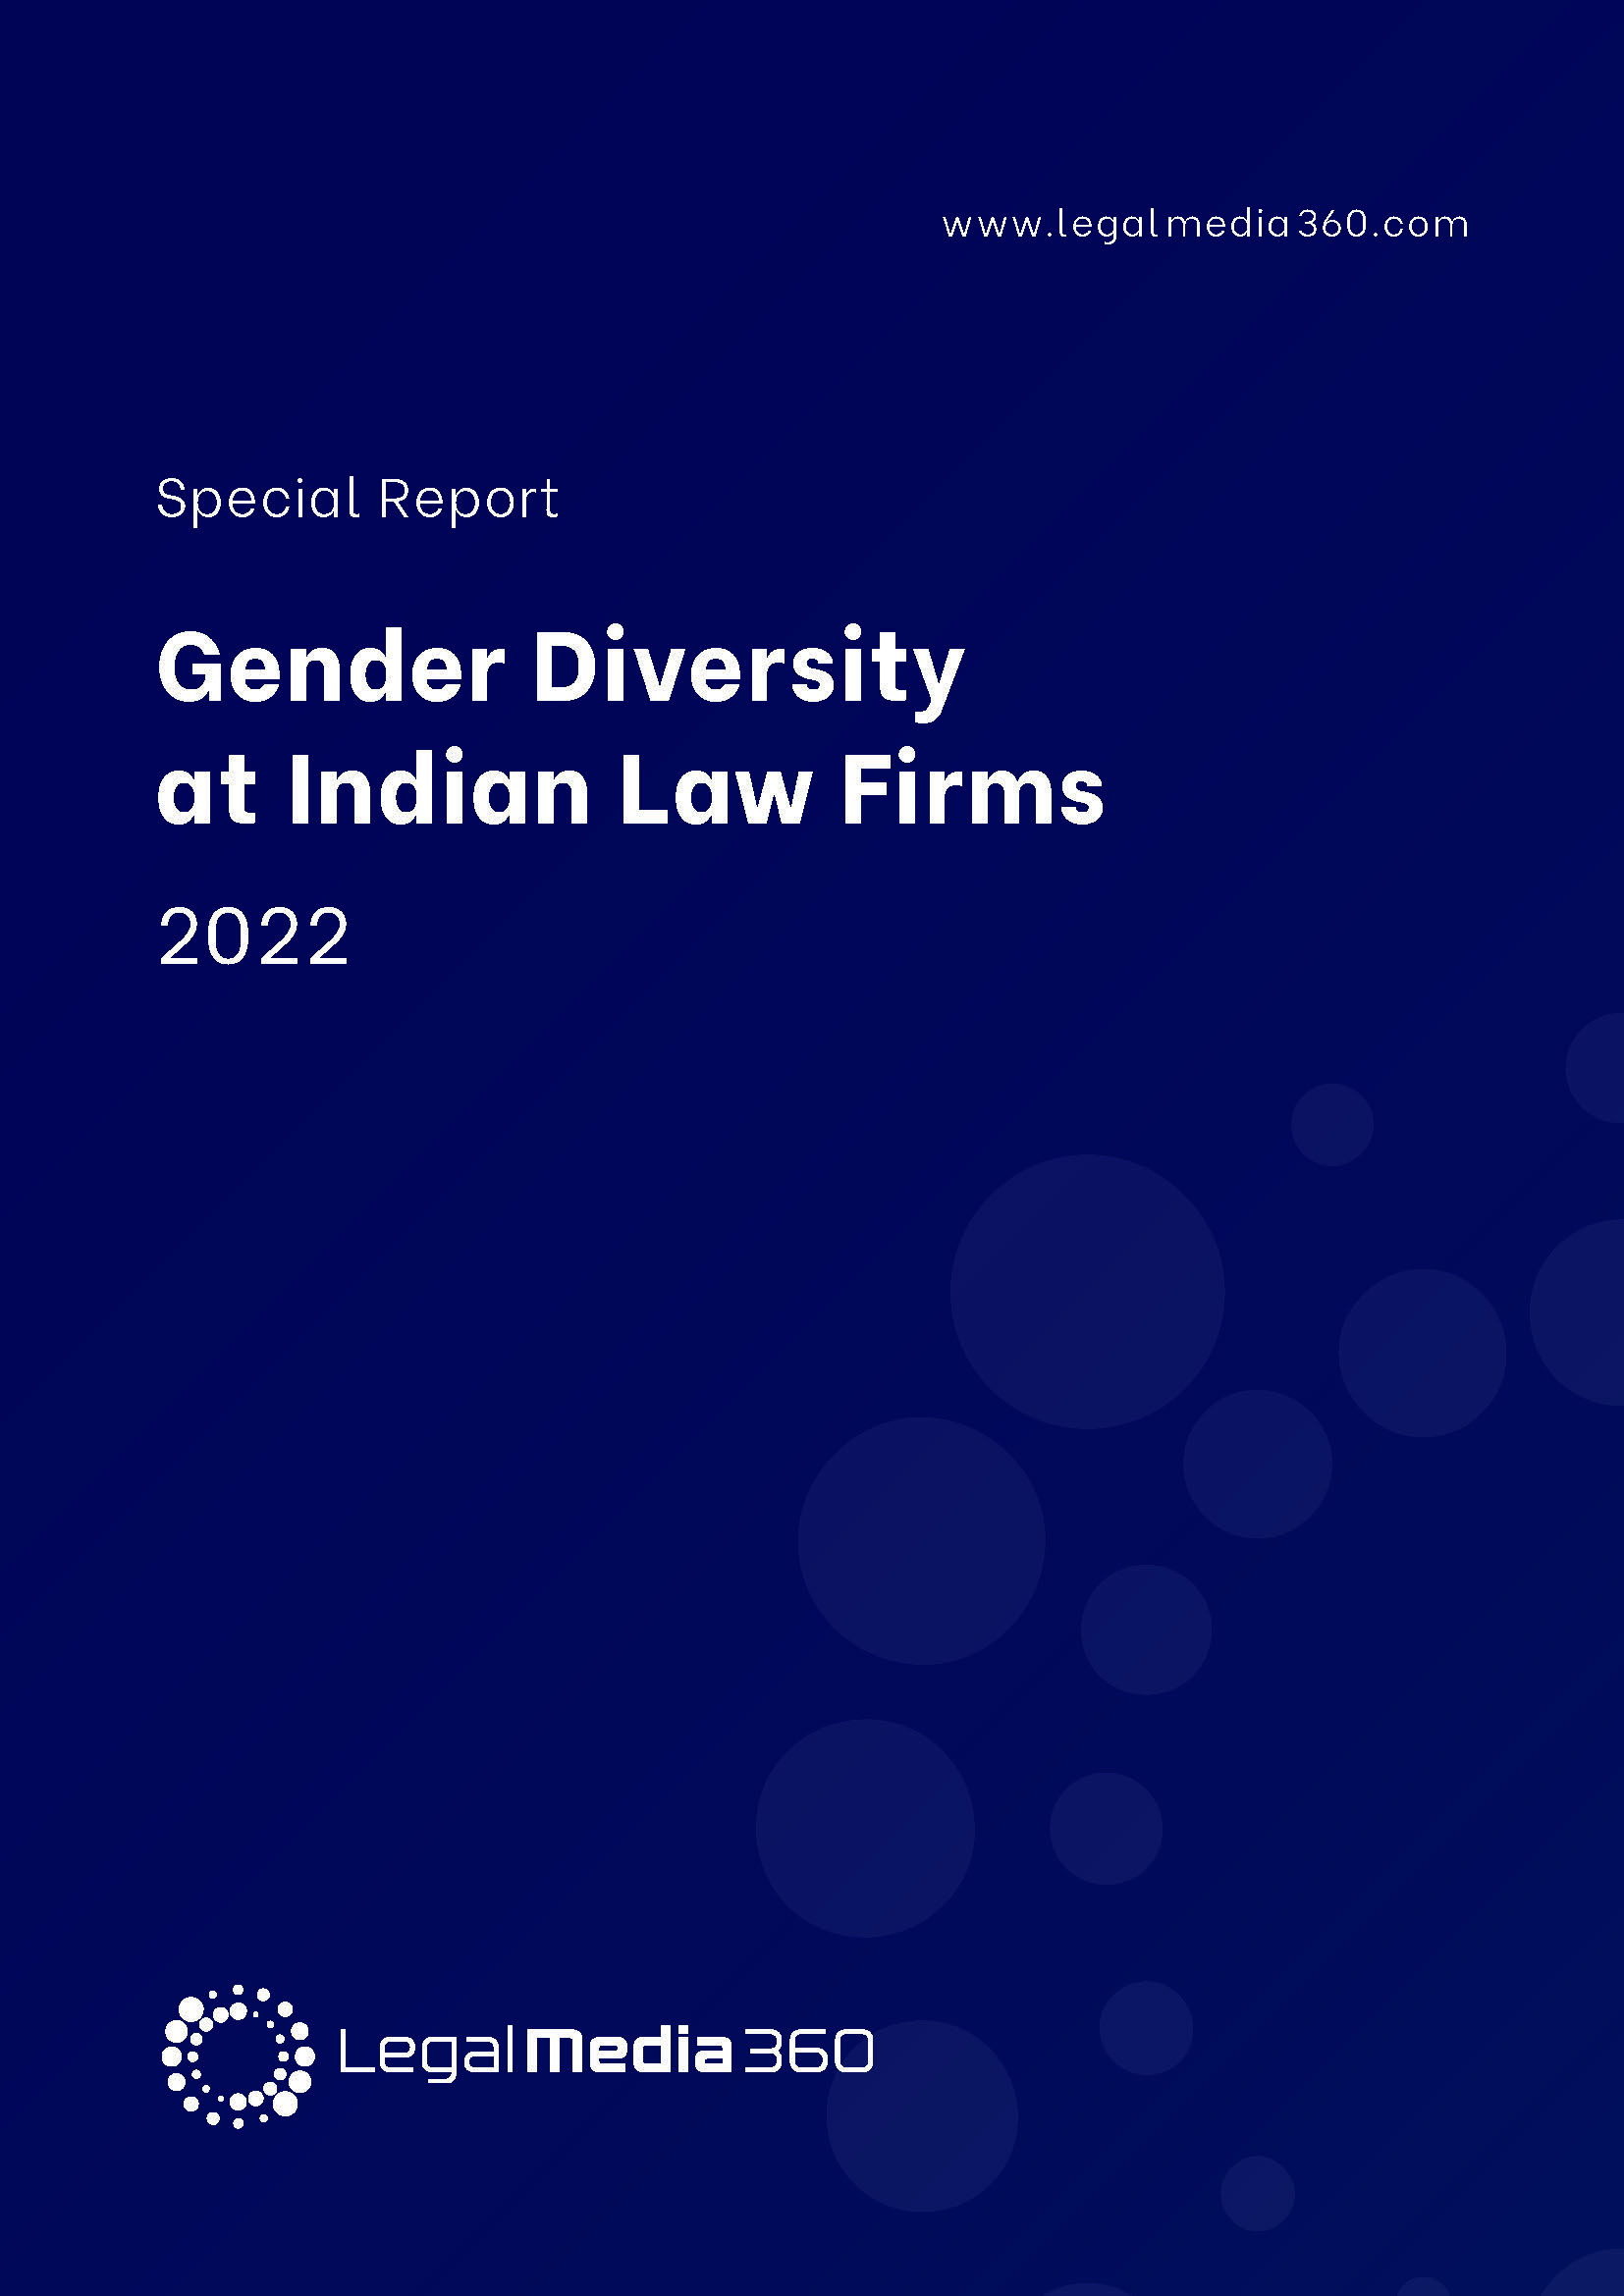 Gender Diversity at Indian Law Firms - 2022